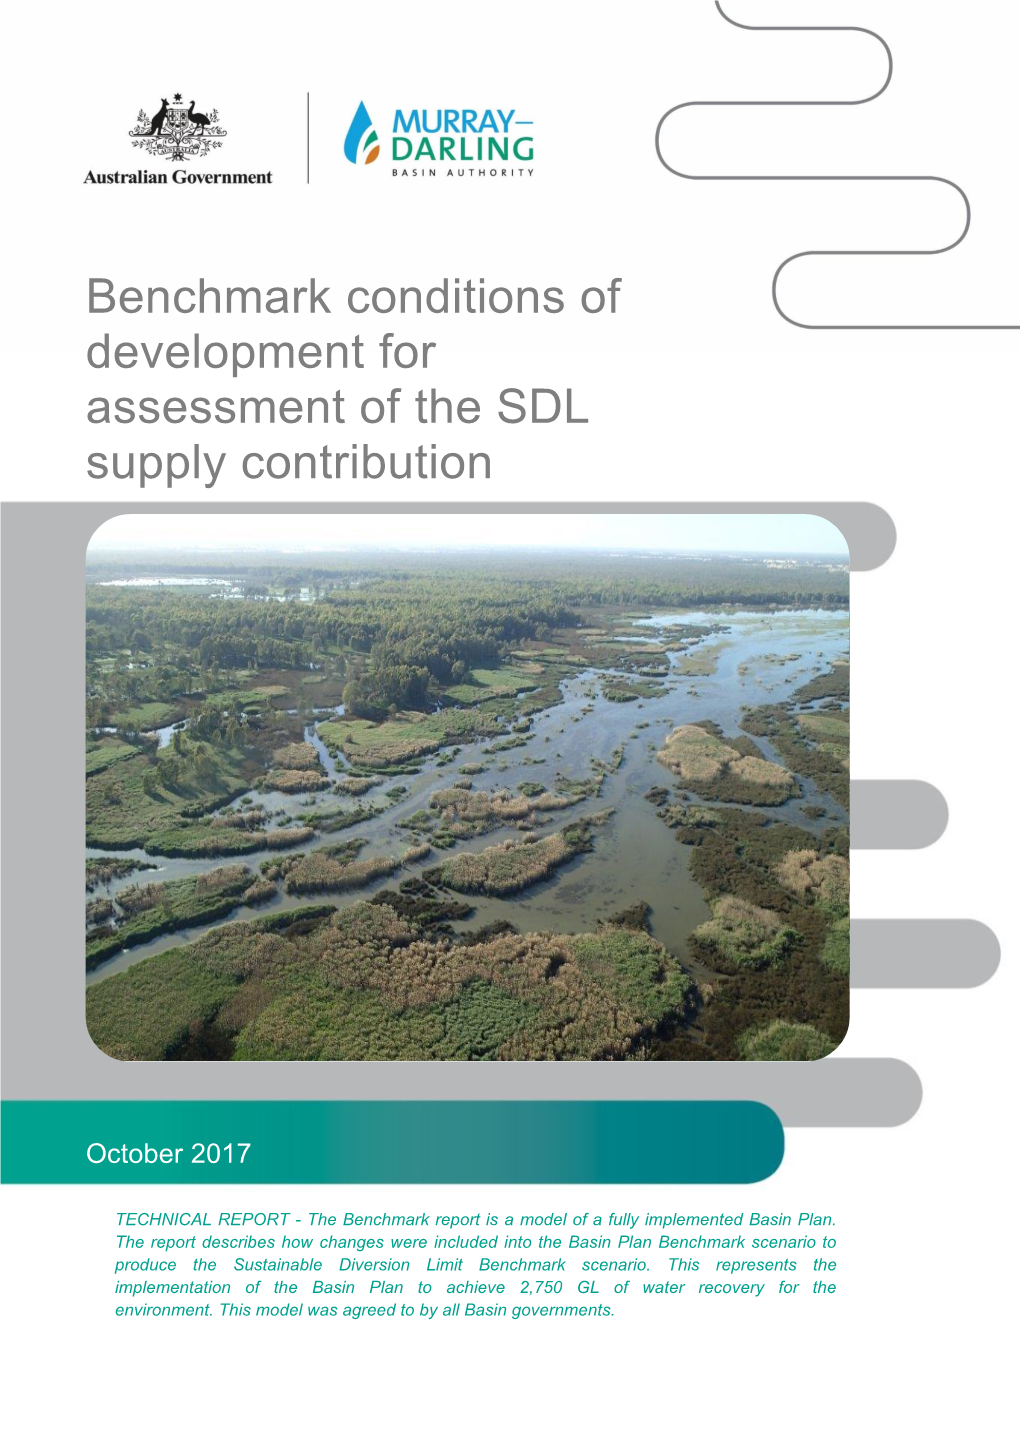 Benchmark Conditions of Development for Assessment of the SDL Supply Contribution